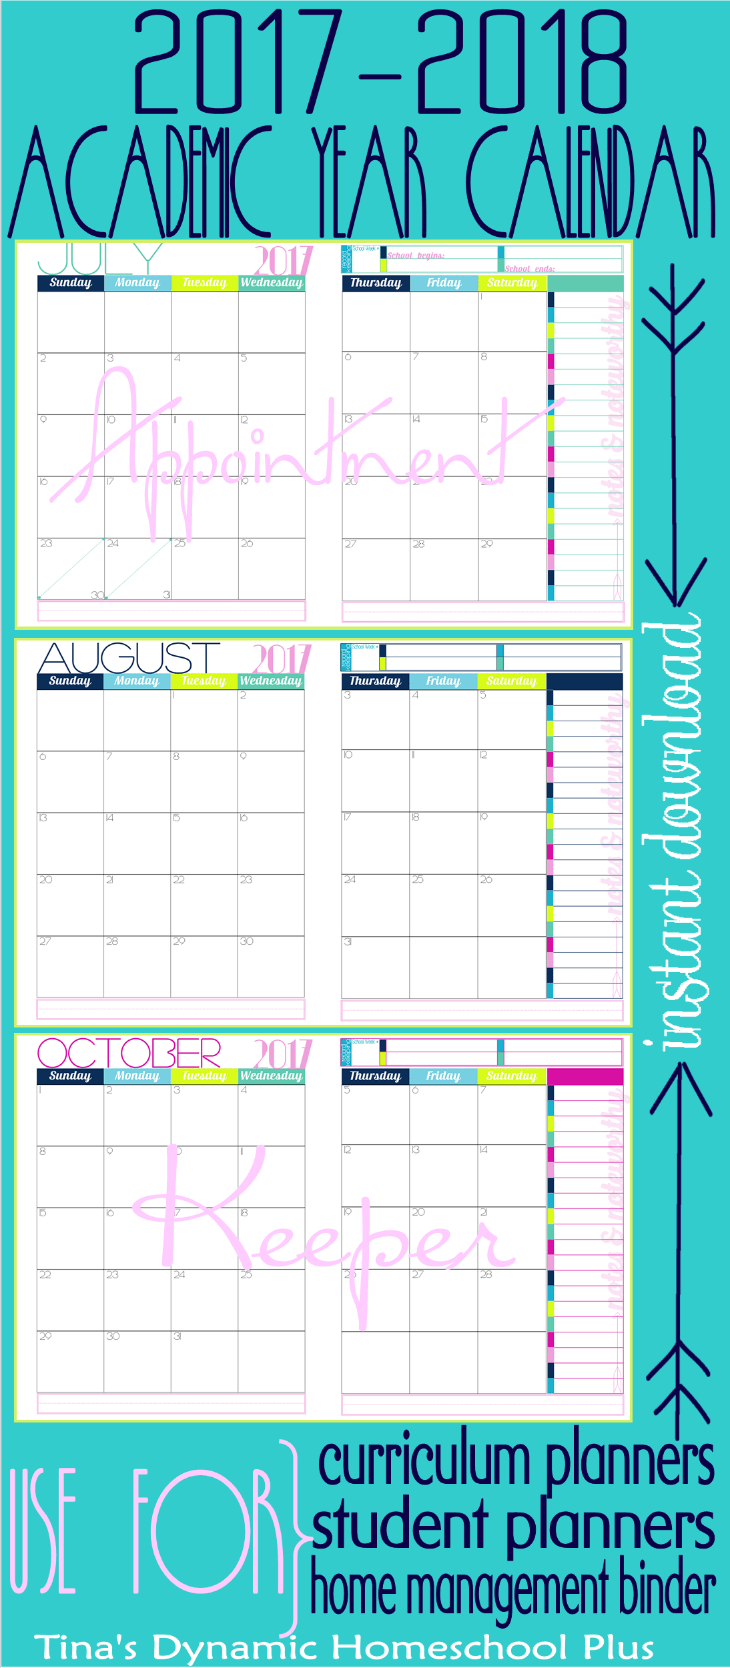 2017 to 2018 Academic Year Glamorous 2 Pages at a Glance. Grab it @Tina's Dynamic Homeschool Plus